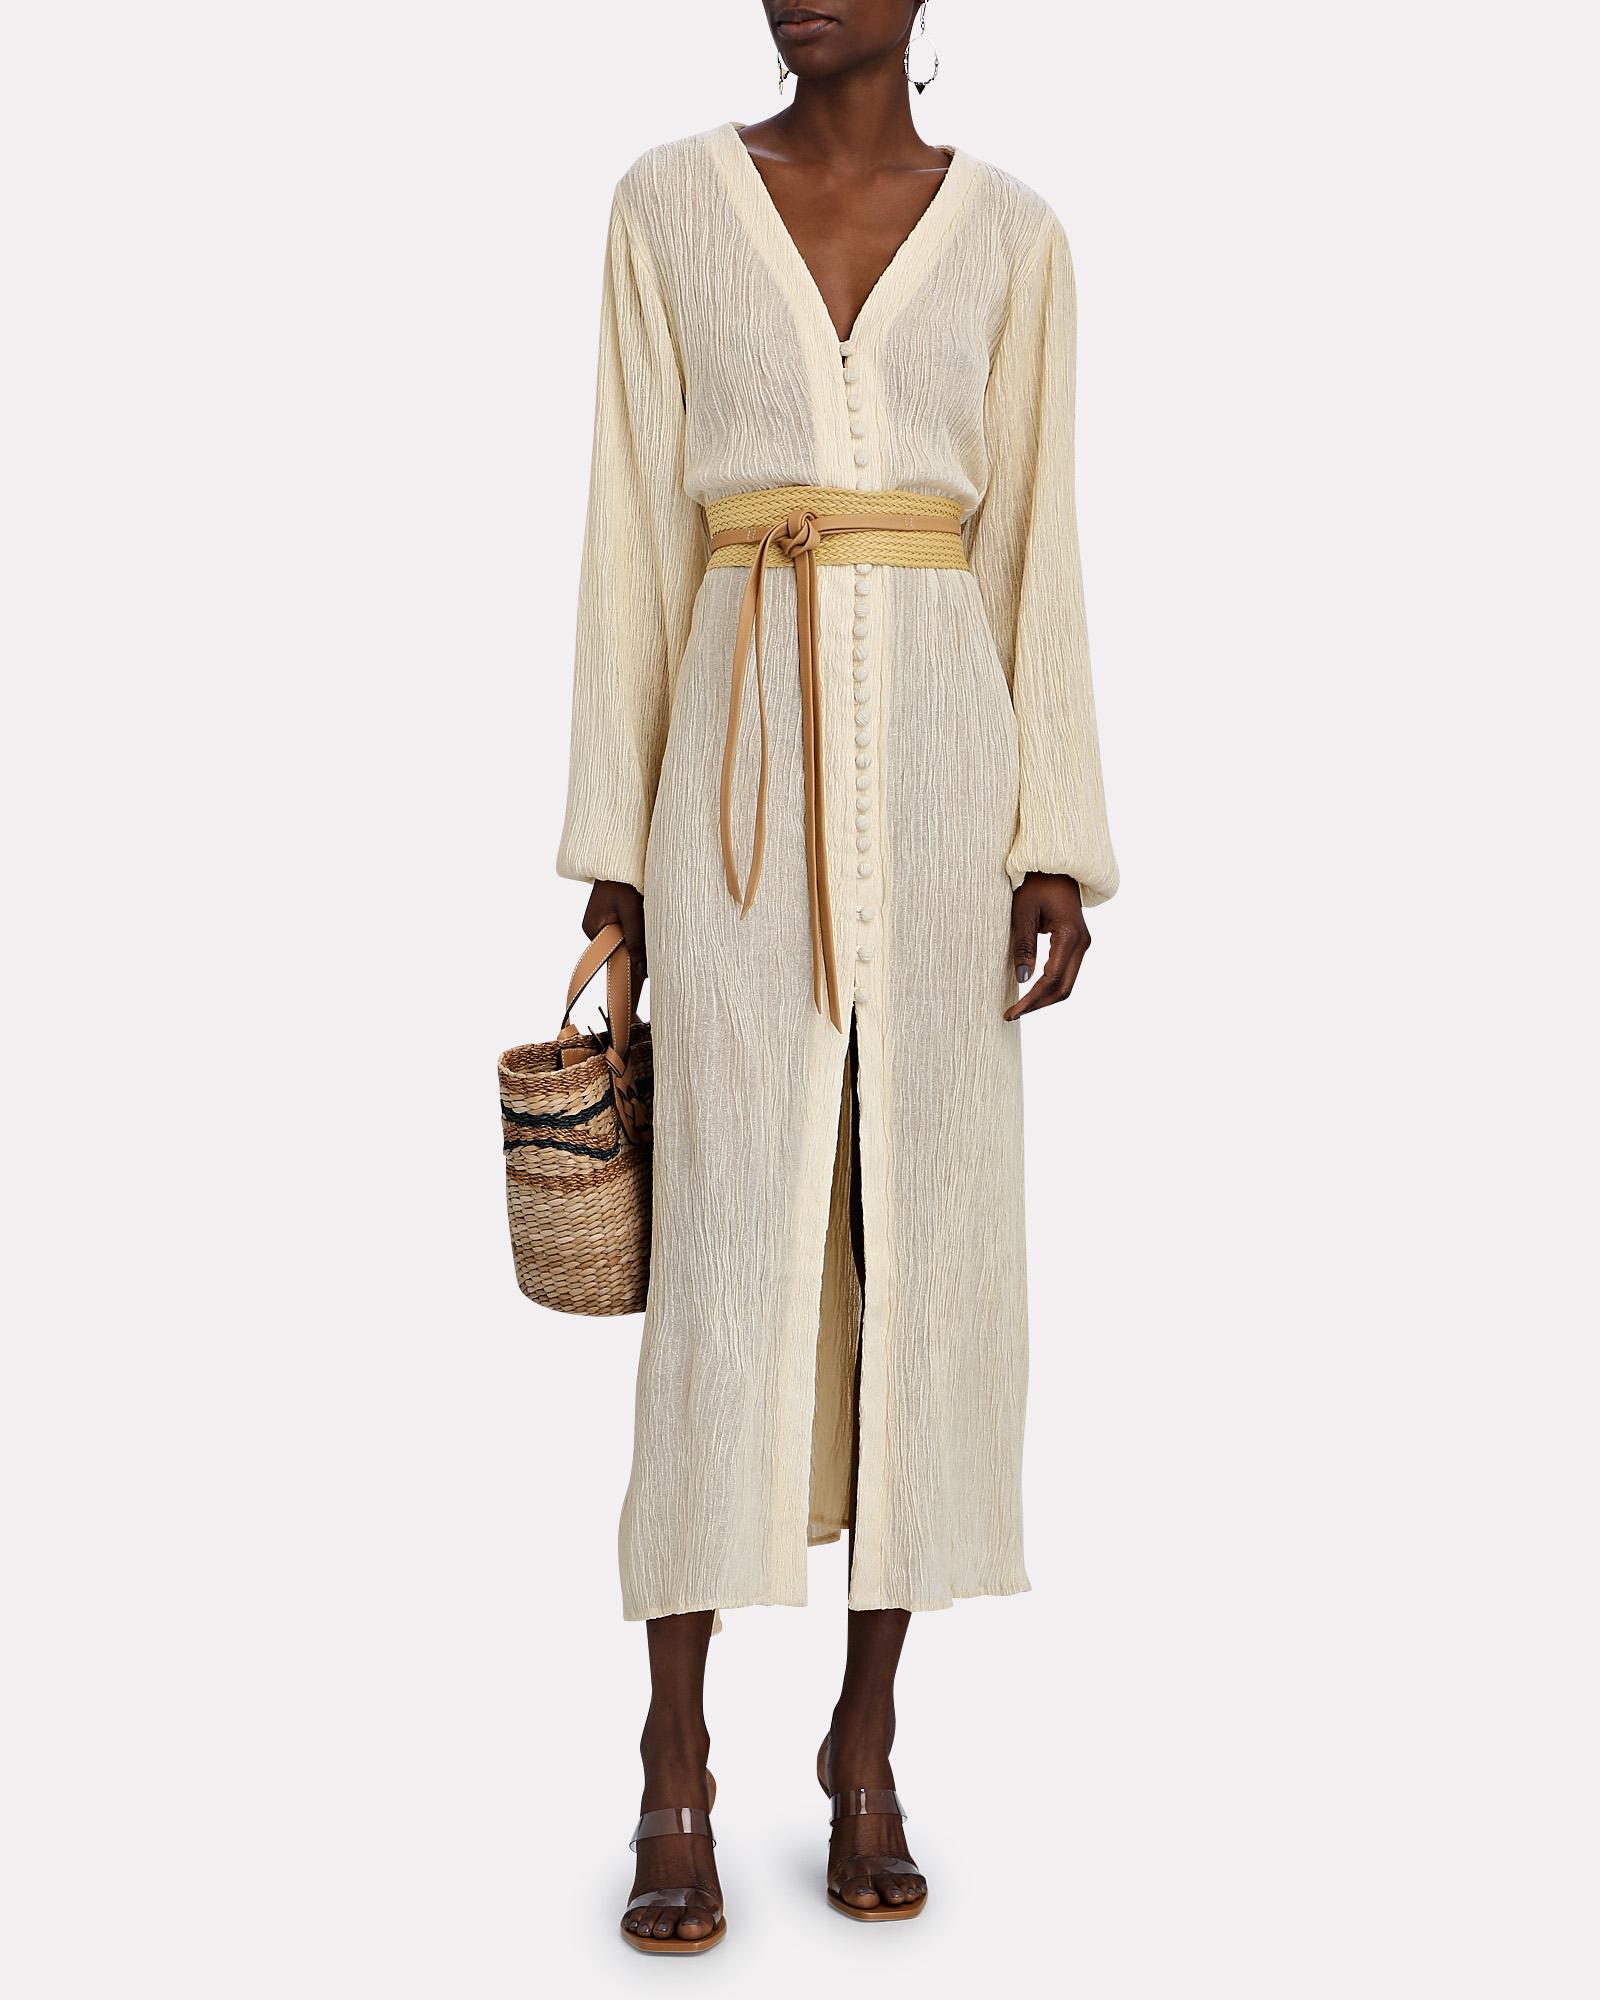 Savannah Morrow Haven Button-up Maxi Dress in Ivory (White) | Lyst